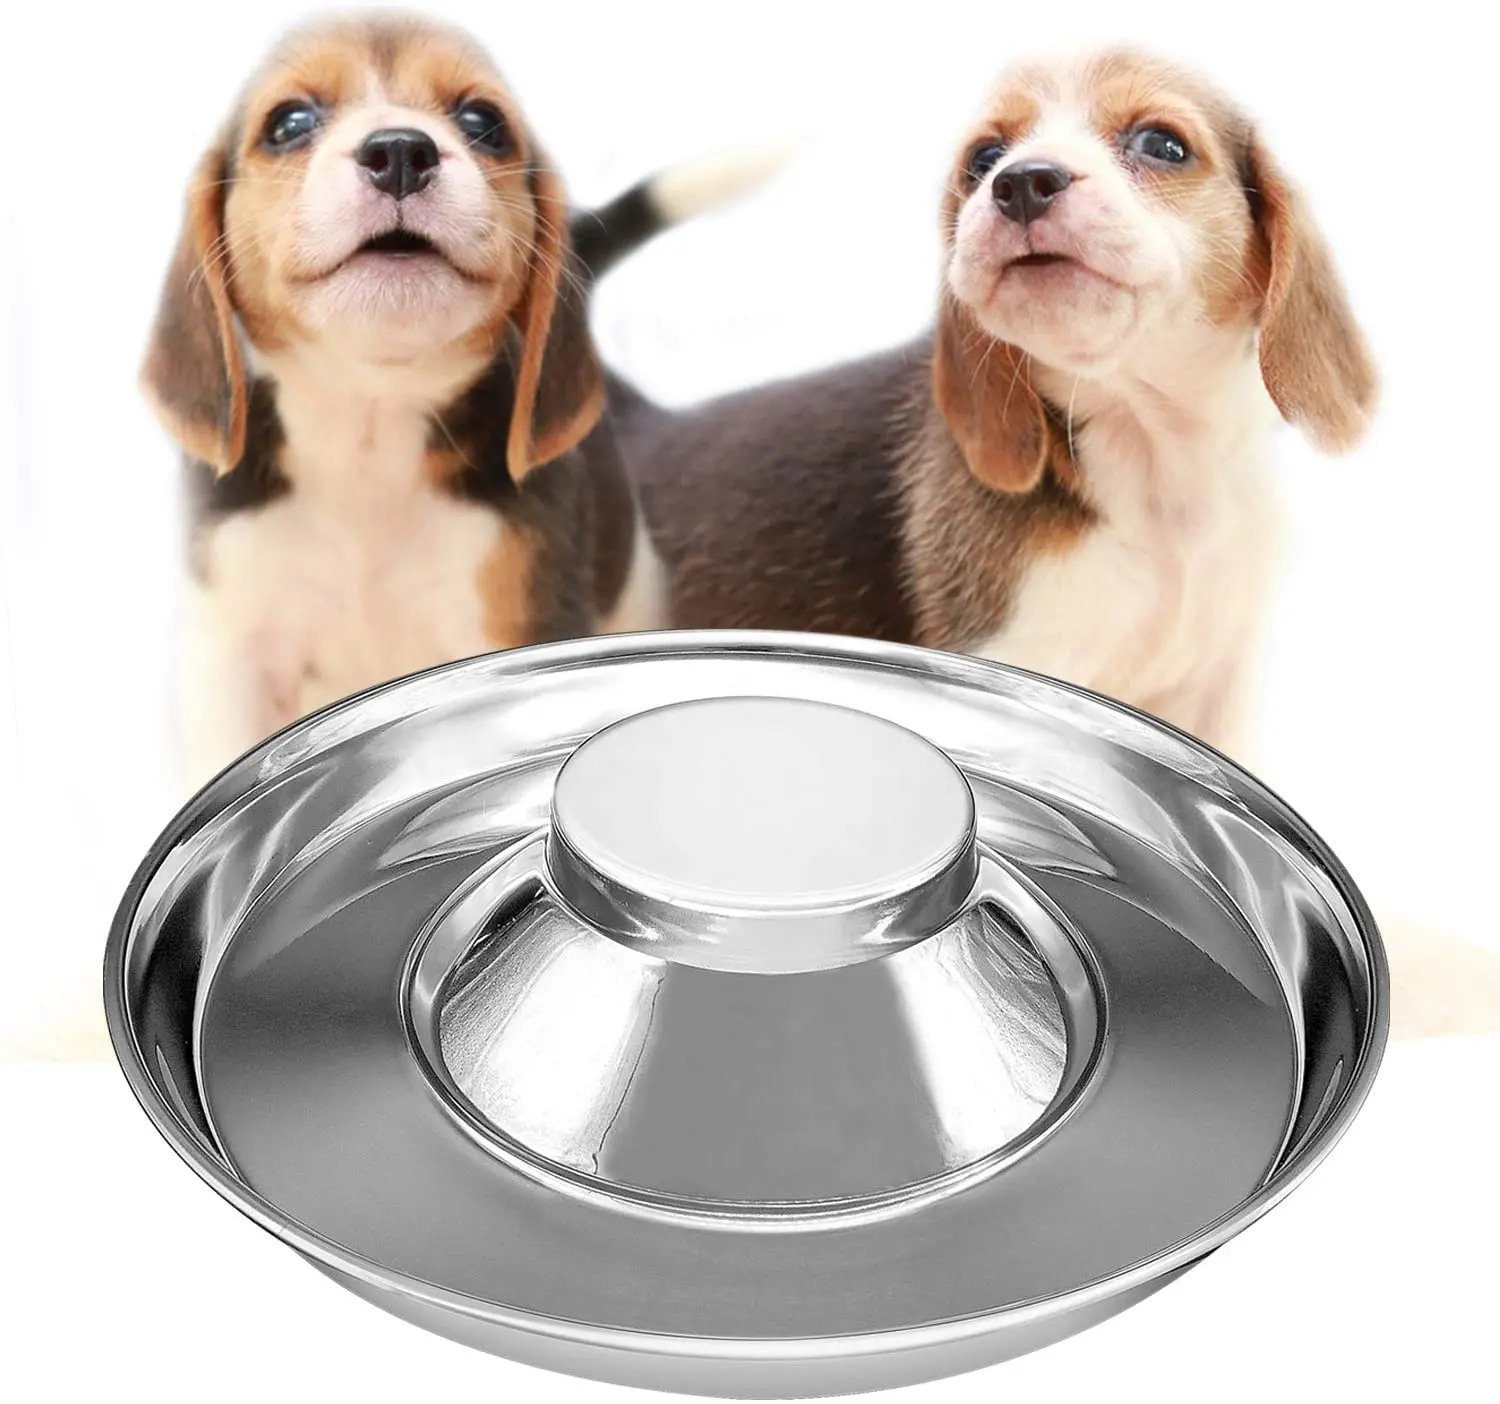 Healthy Metal Dog Dish Puppy Slow Feeder Bowls Food Feeding Water Weaning Pets Bowl Silver Stainless Steel Dog Bowl